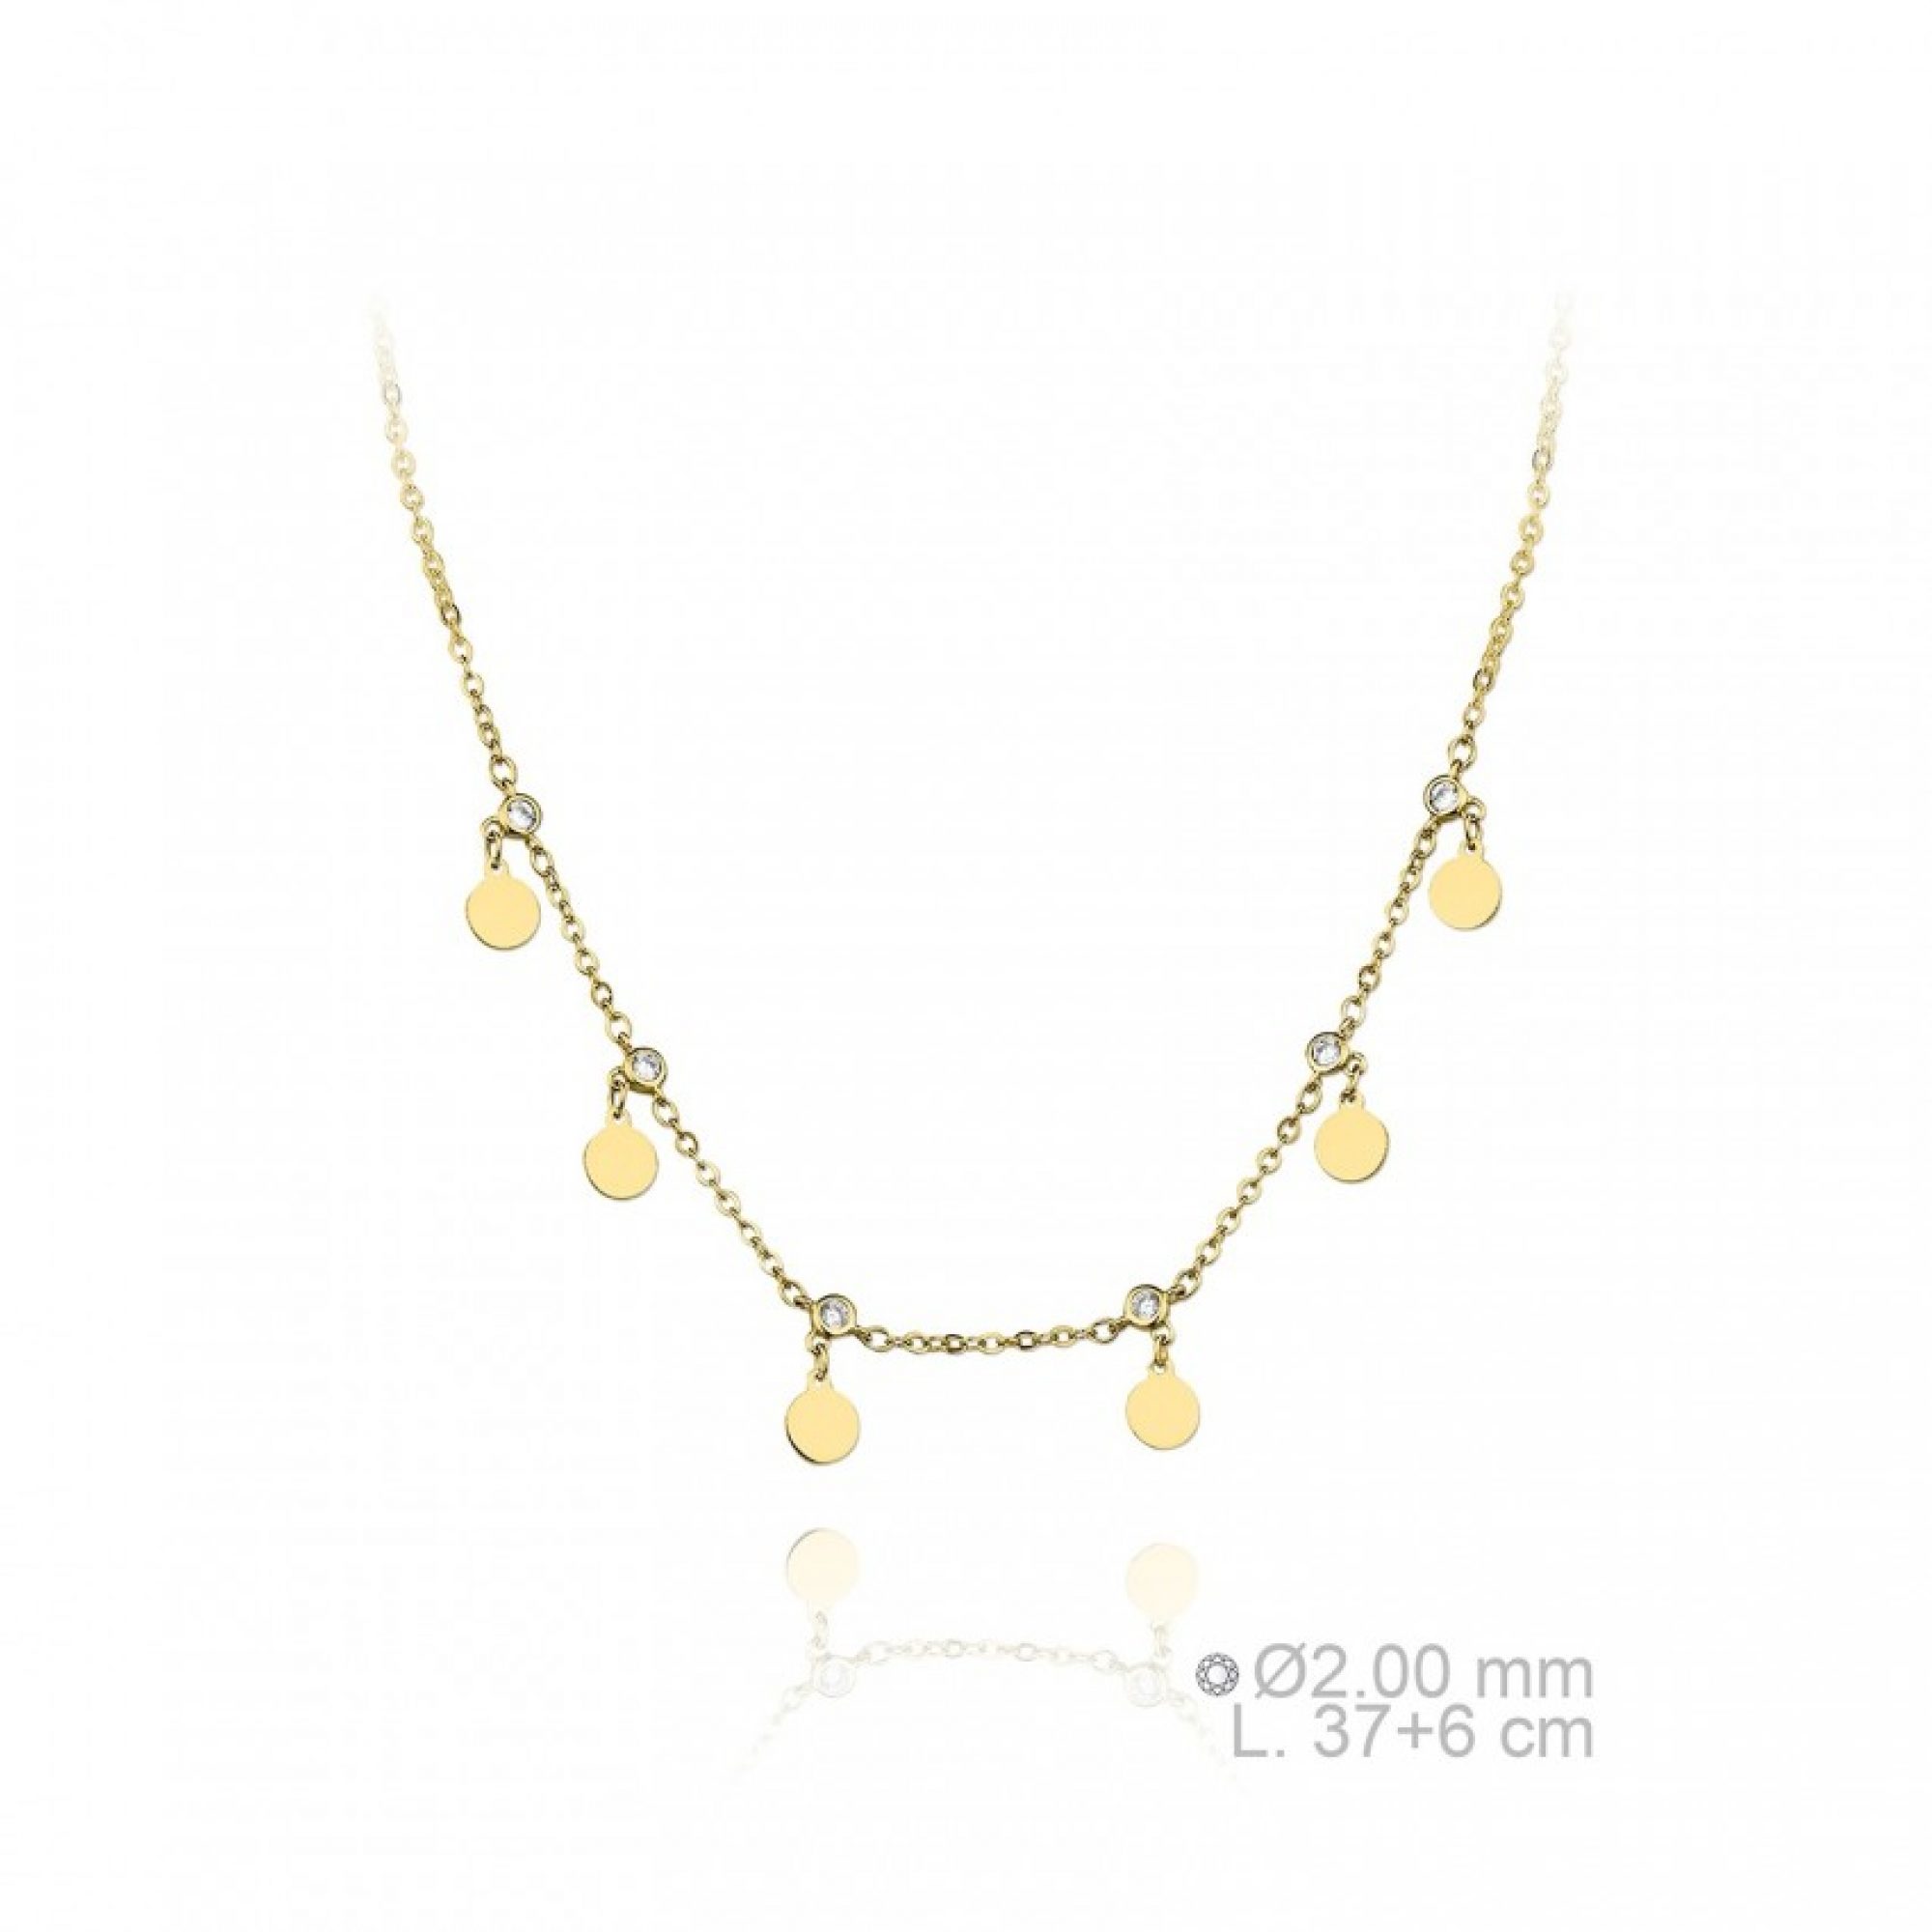 Gold plated dangle necklace with zircon stones